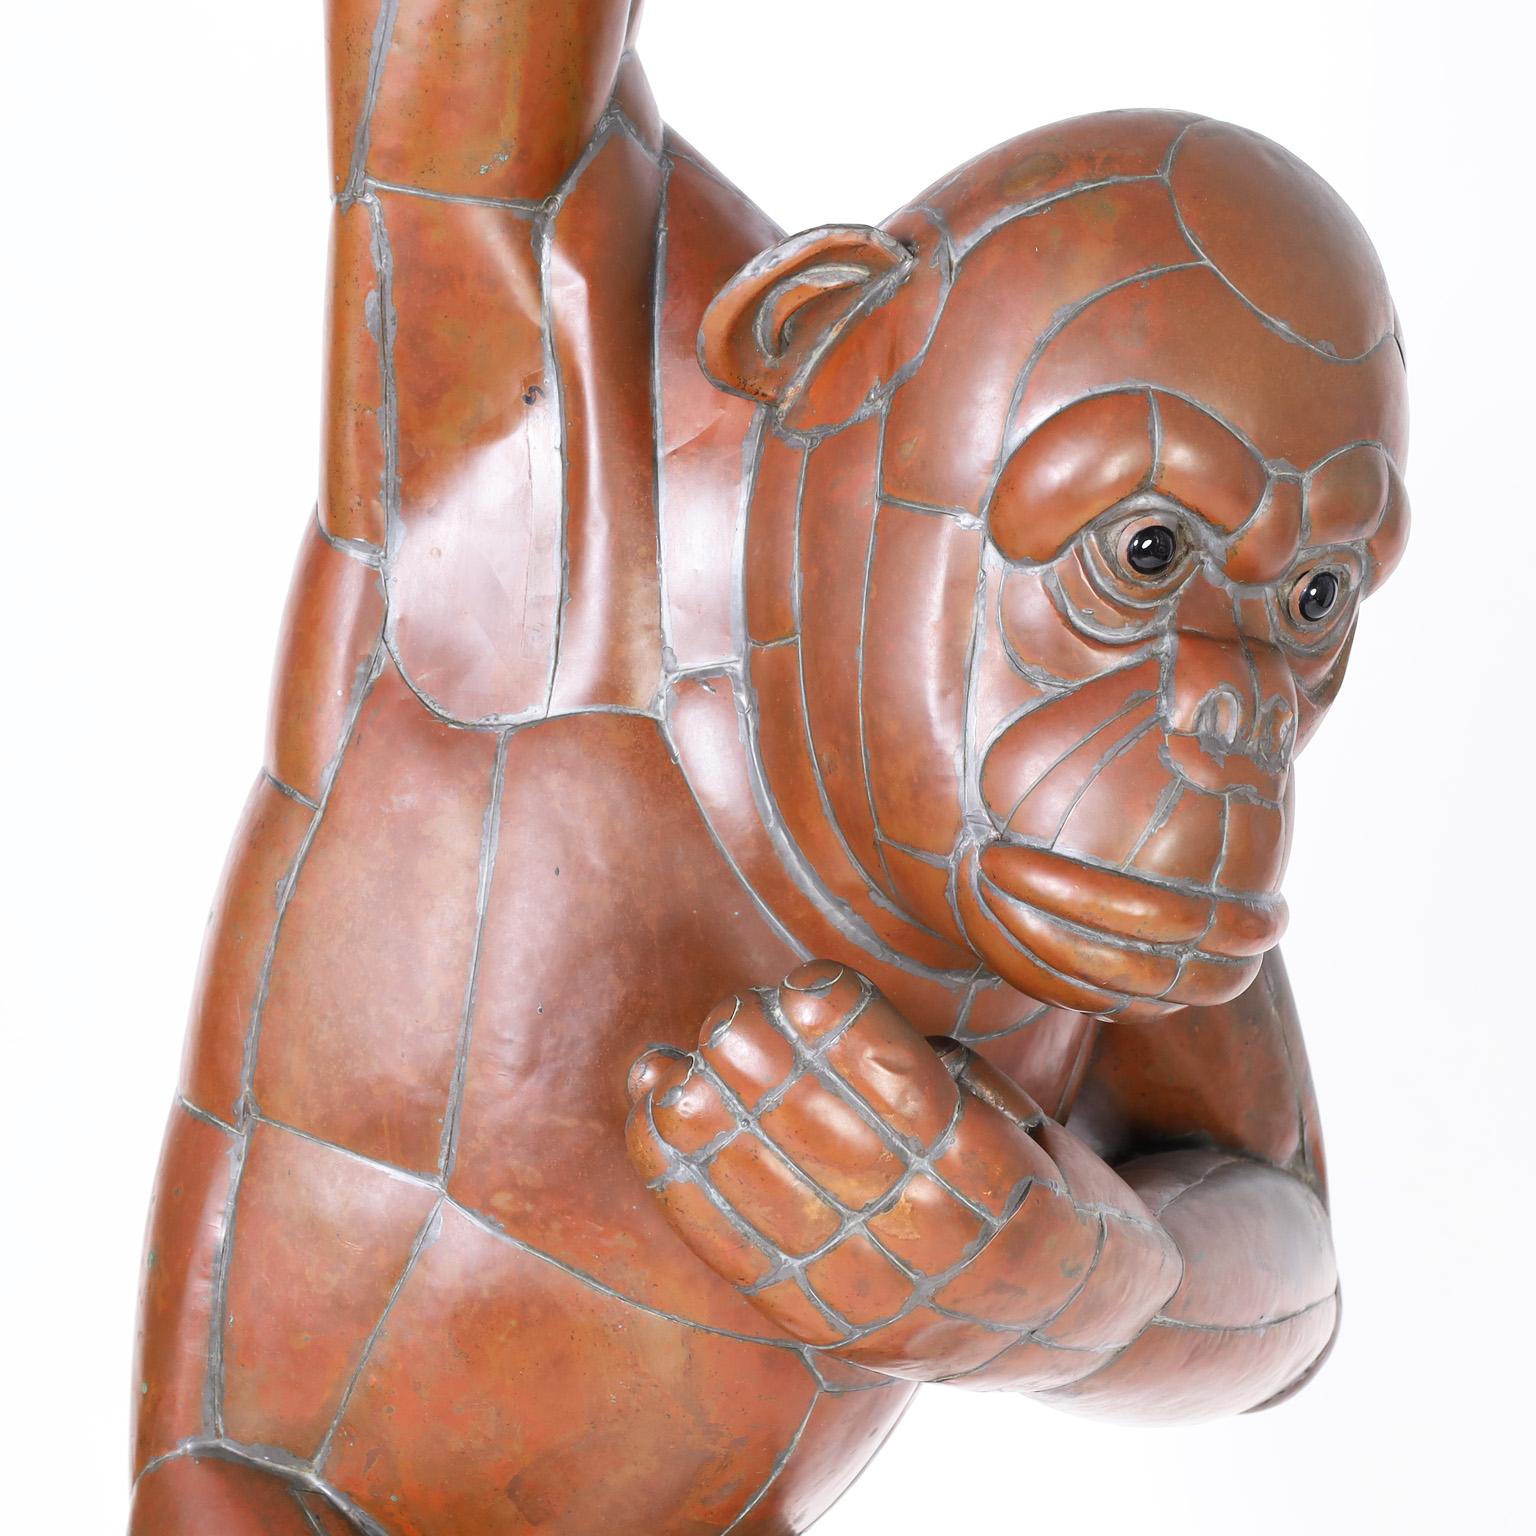 Mexican Mid Century Monkey or Chimpanzee Sculpture Signed Sergio Bustamante